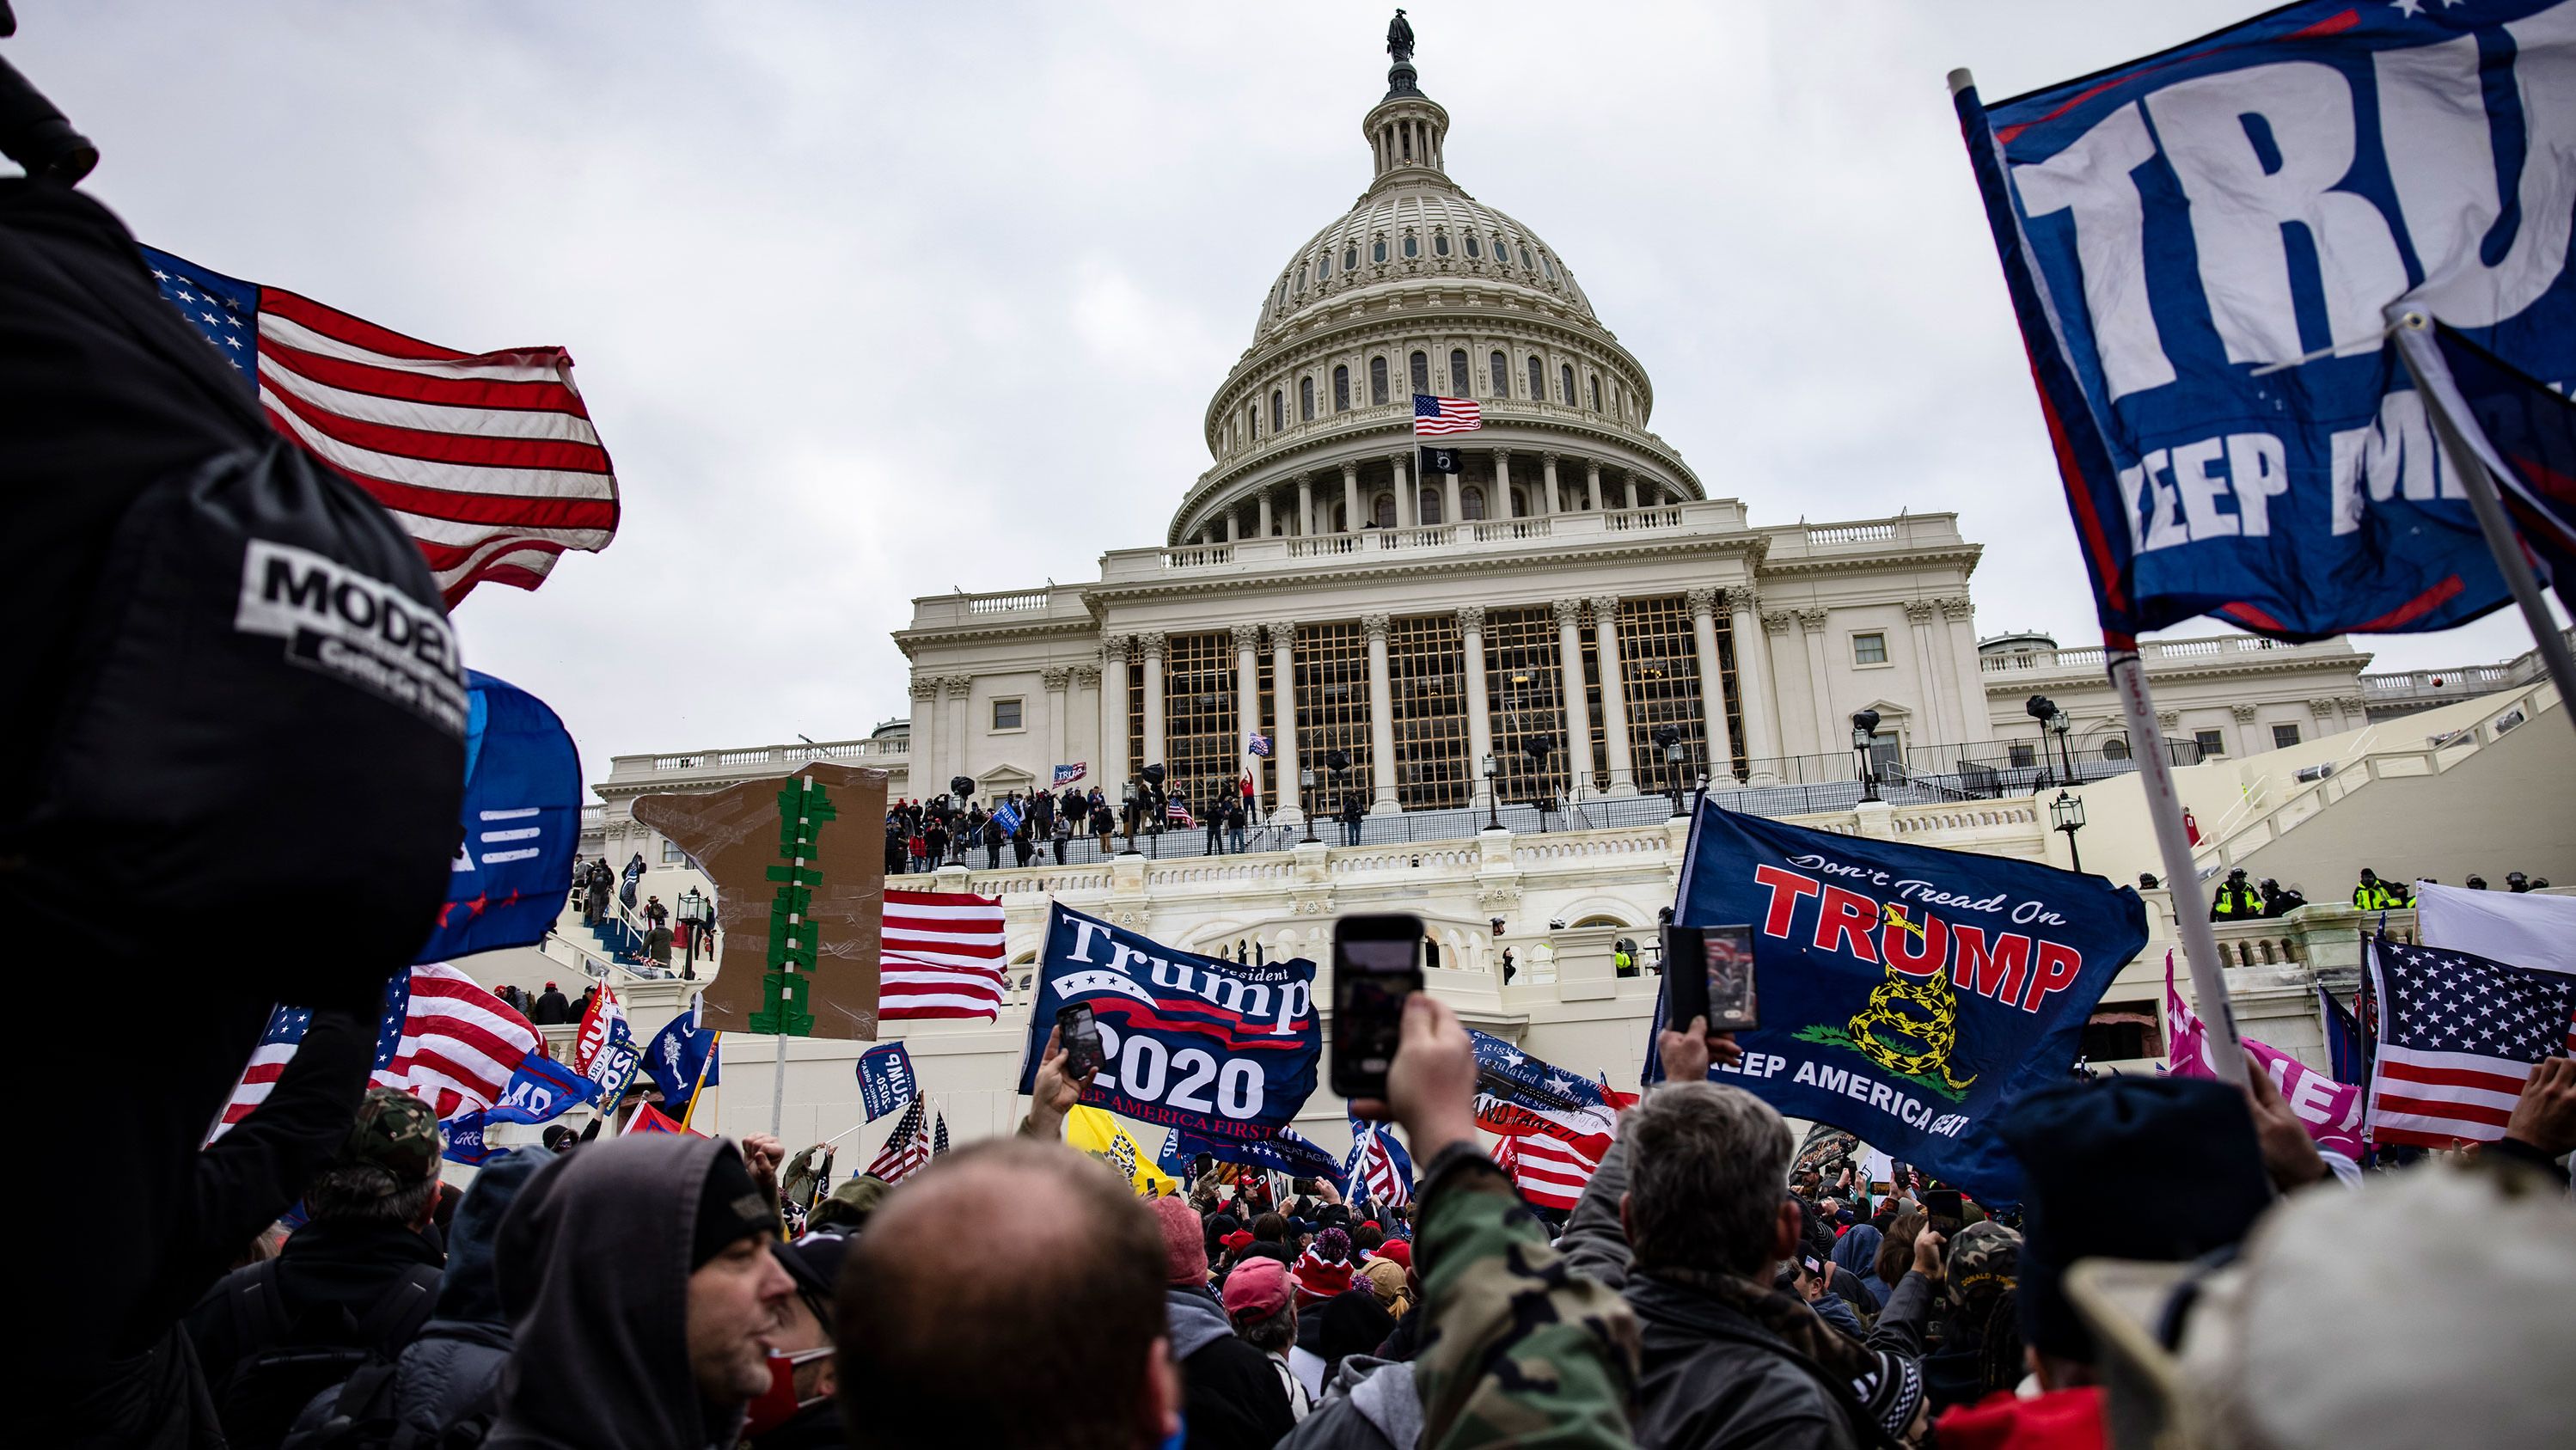 Pro-Trump supporters storm the US Capitol following a rally with President Donald Trump on January 6, 2021 in Washington, DC.